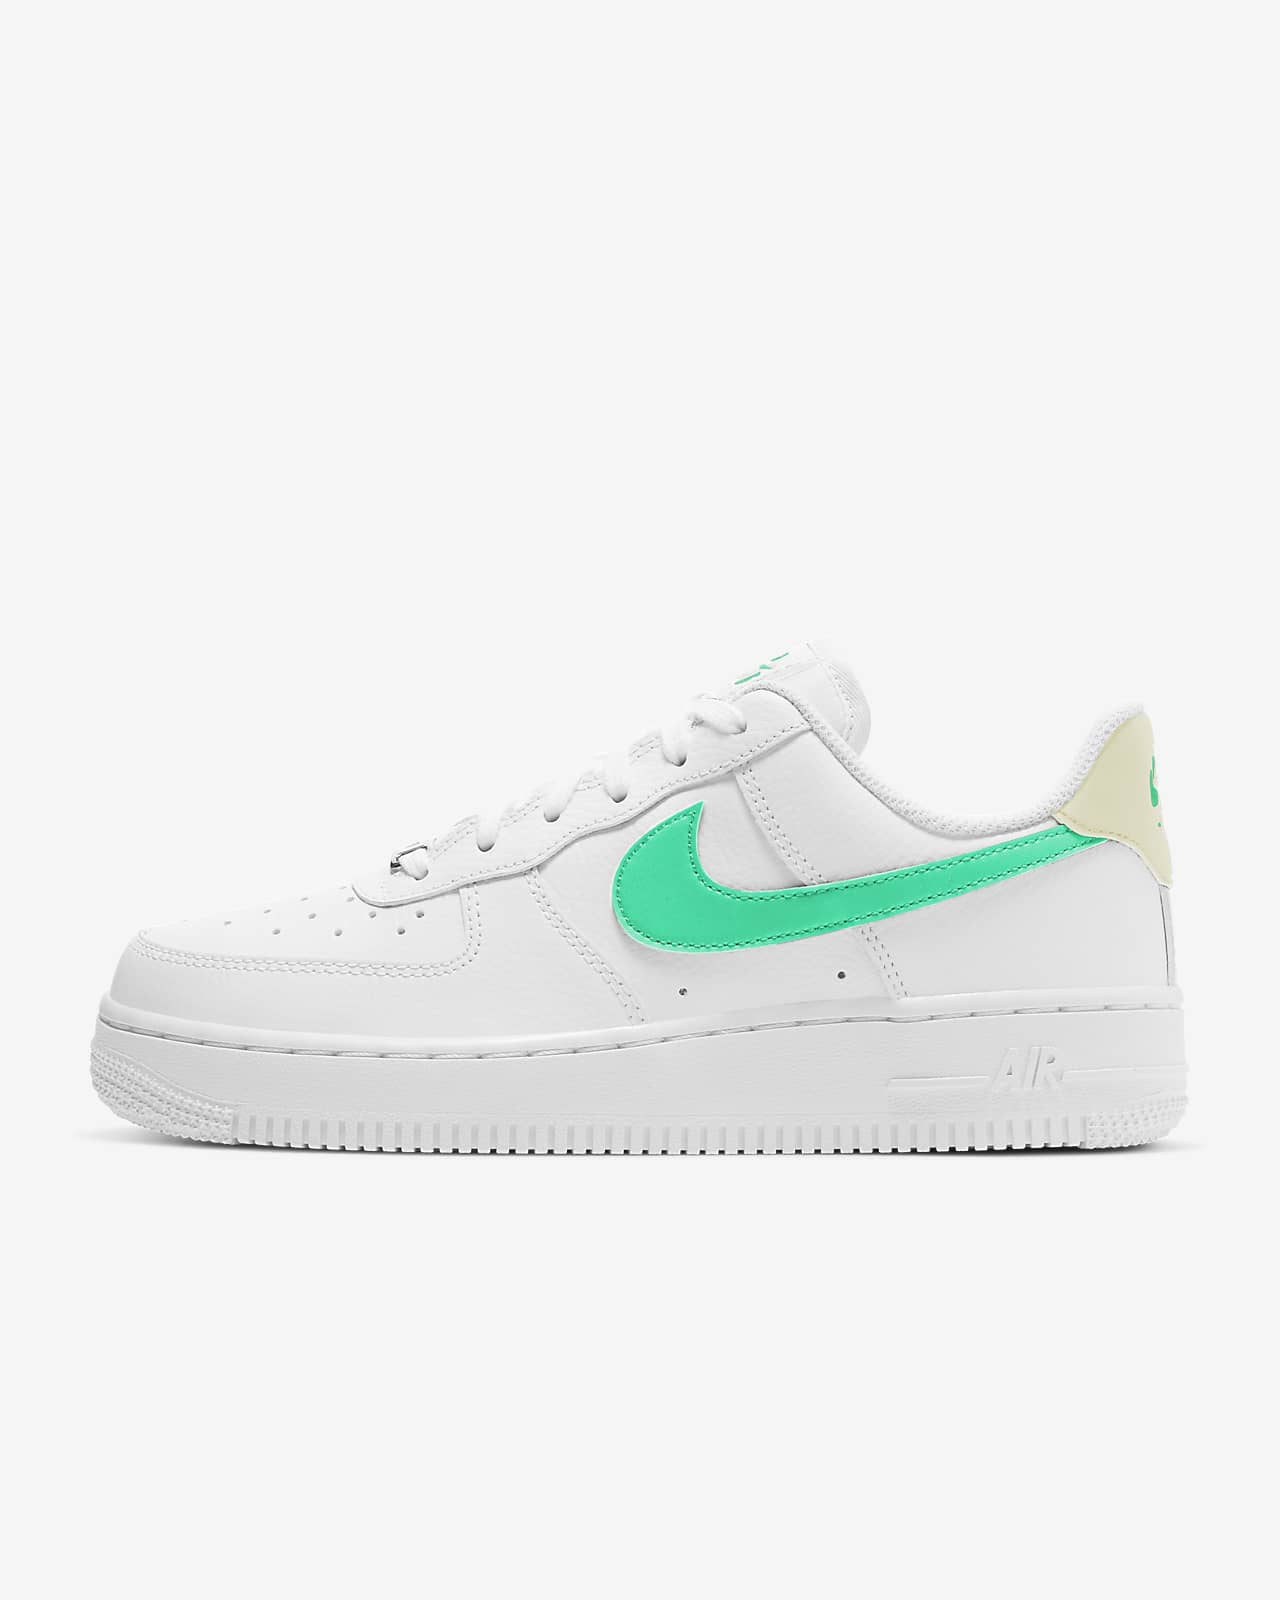 nike air force 1 womens size 7